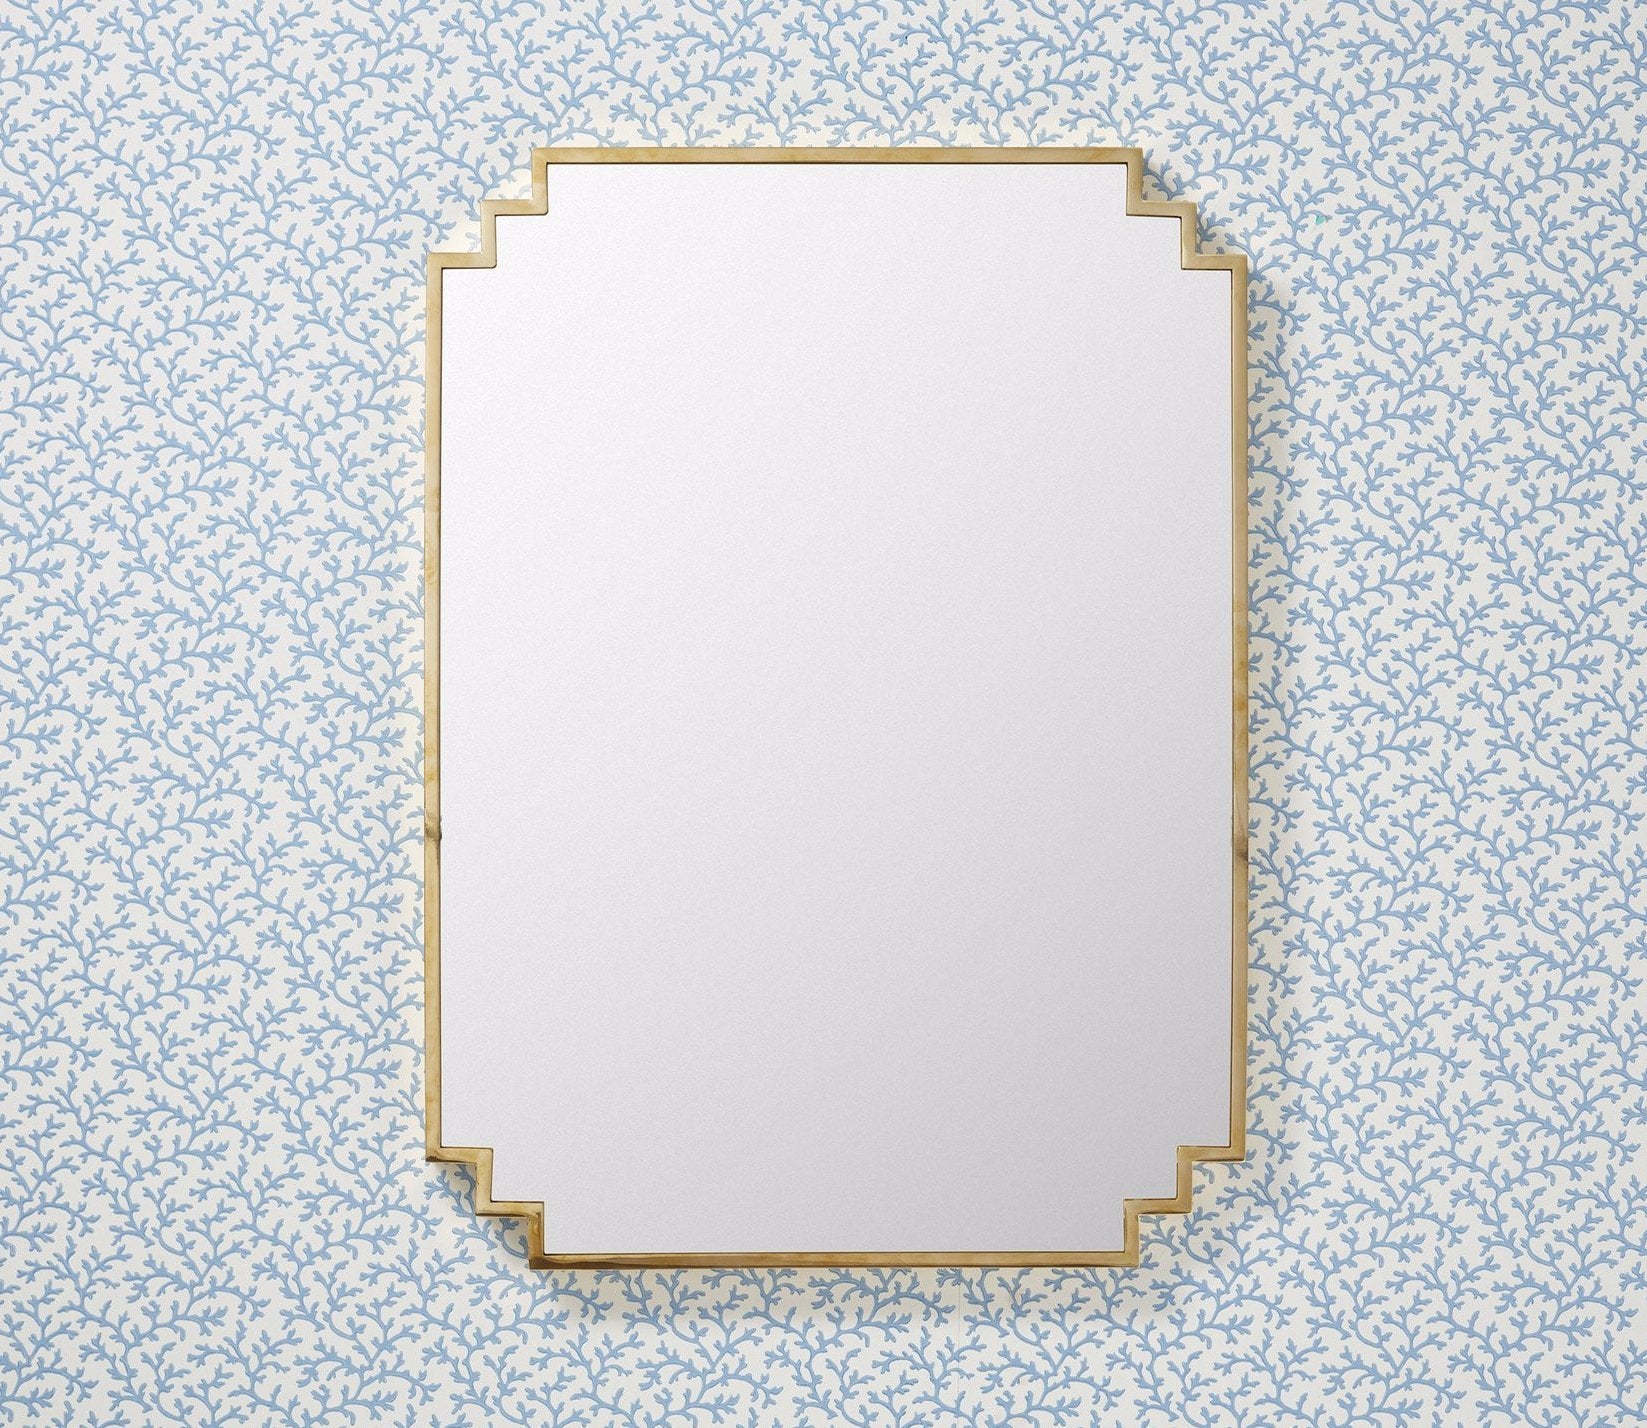 Augustus Wall Mirror Product Image 1